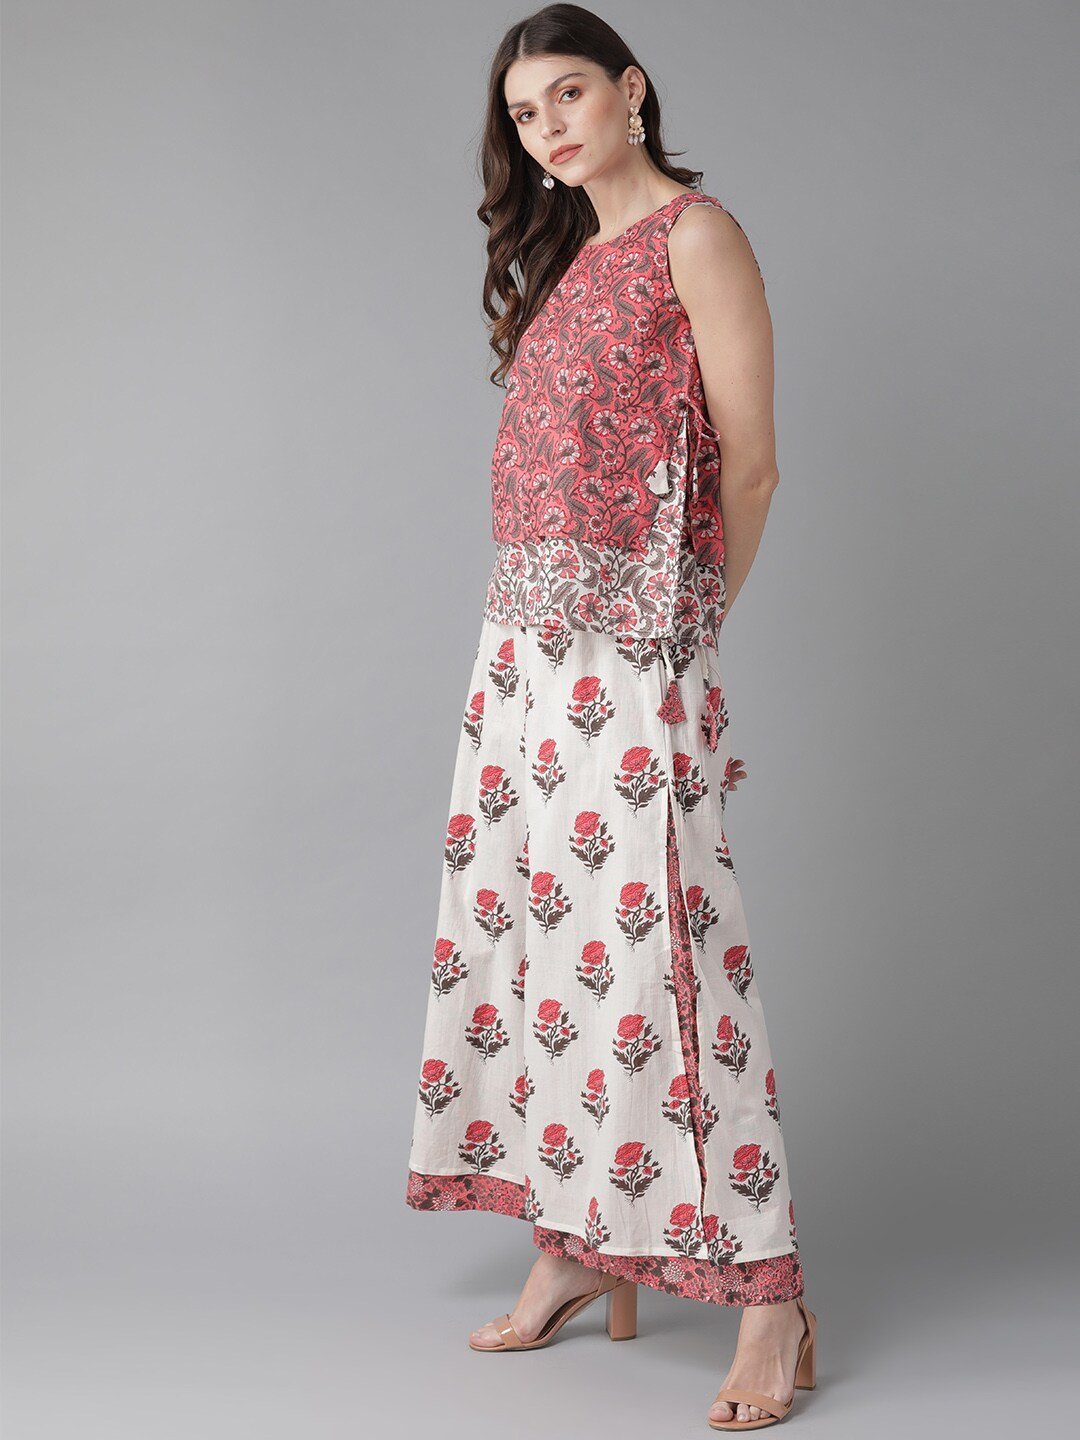 Women's  Printed Top with Palazzos - AKS